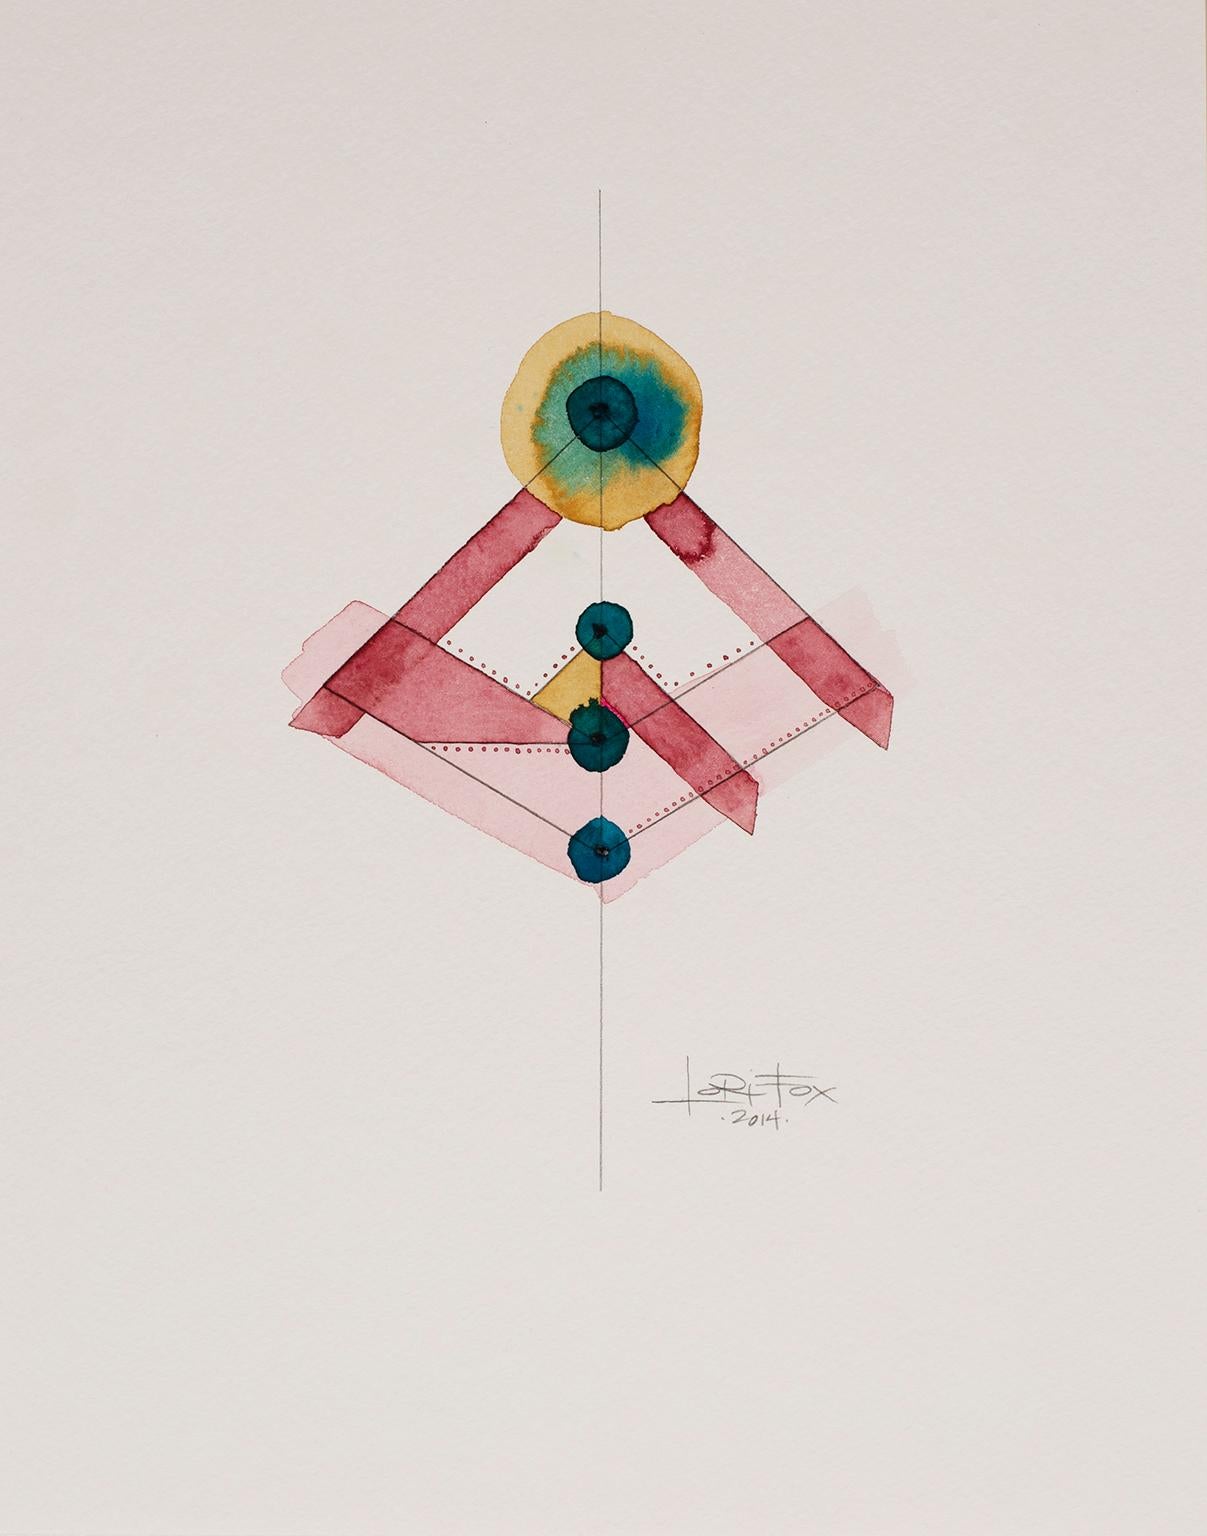 Totem 3.002, 2014 by Lori Fox
Watercolor and graphite on paper. 
14 x 11 inch unframed.  
Framed size is 15.25 x 12.25 x 1.75 inch (ask about framed price)
Red, pink, yellow gold, blue and teal colors make this original from the Totem series by Lori